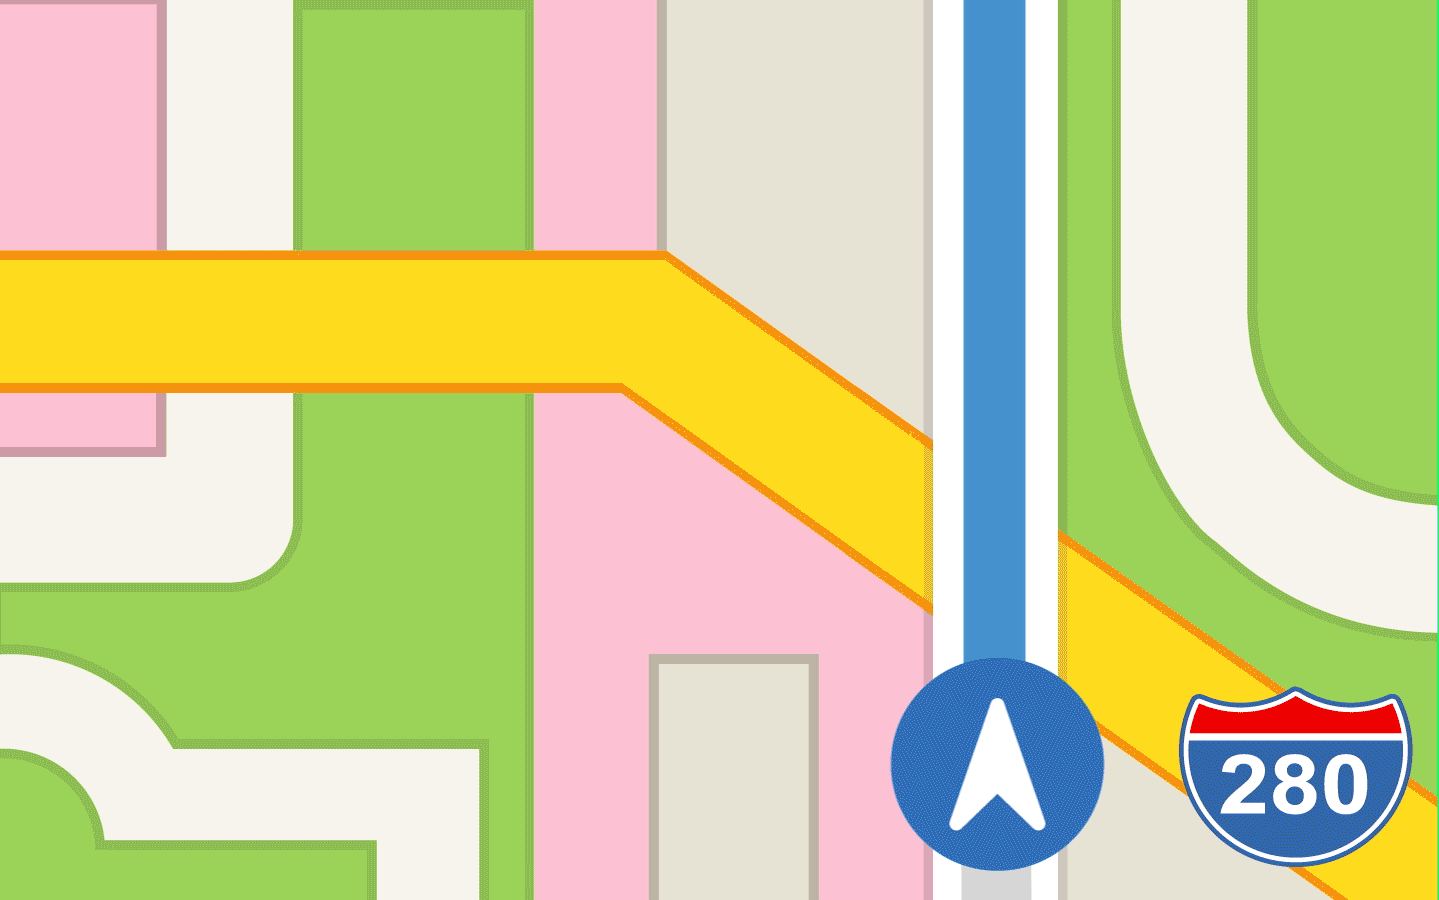 Animated Apple Maps logo, showing a wrong turn.